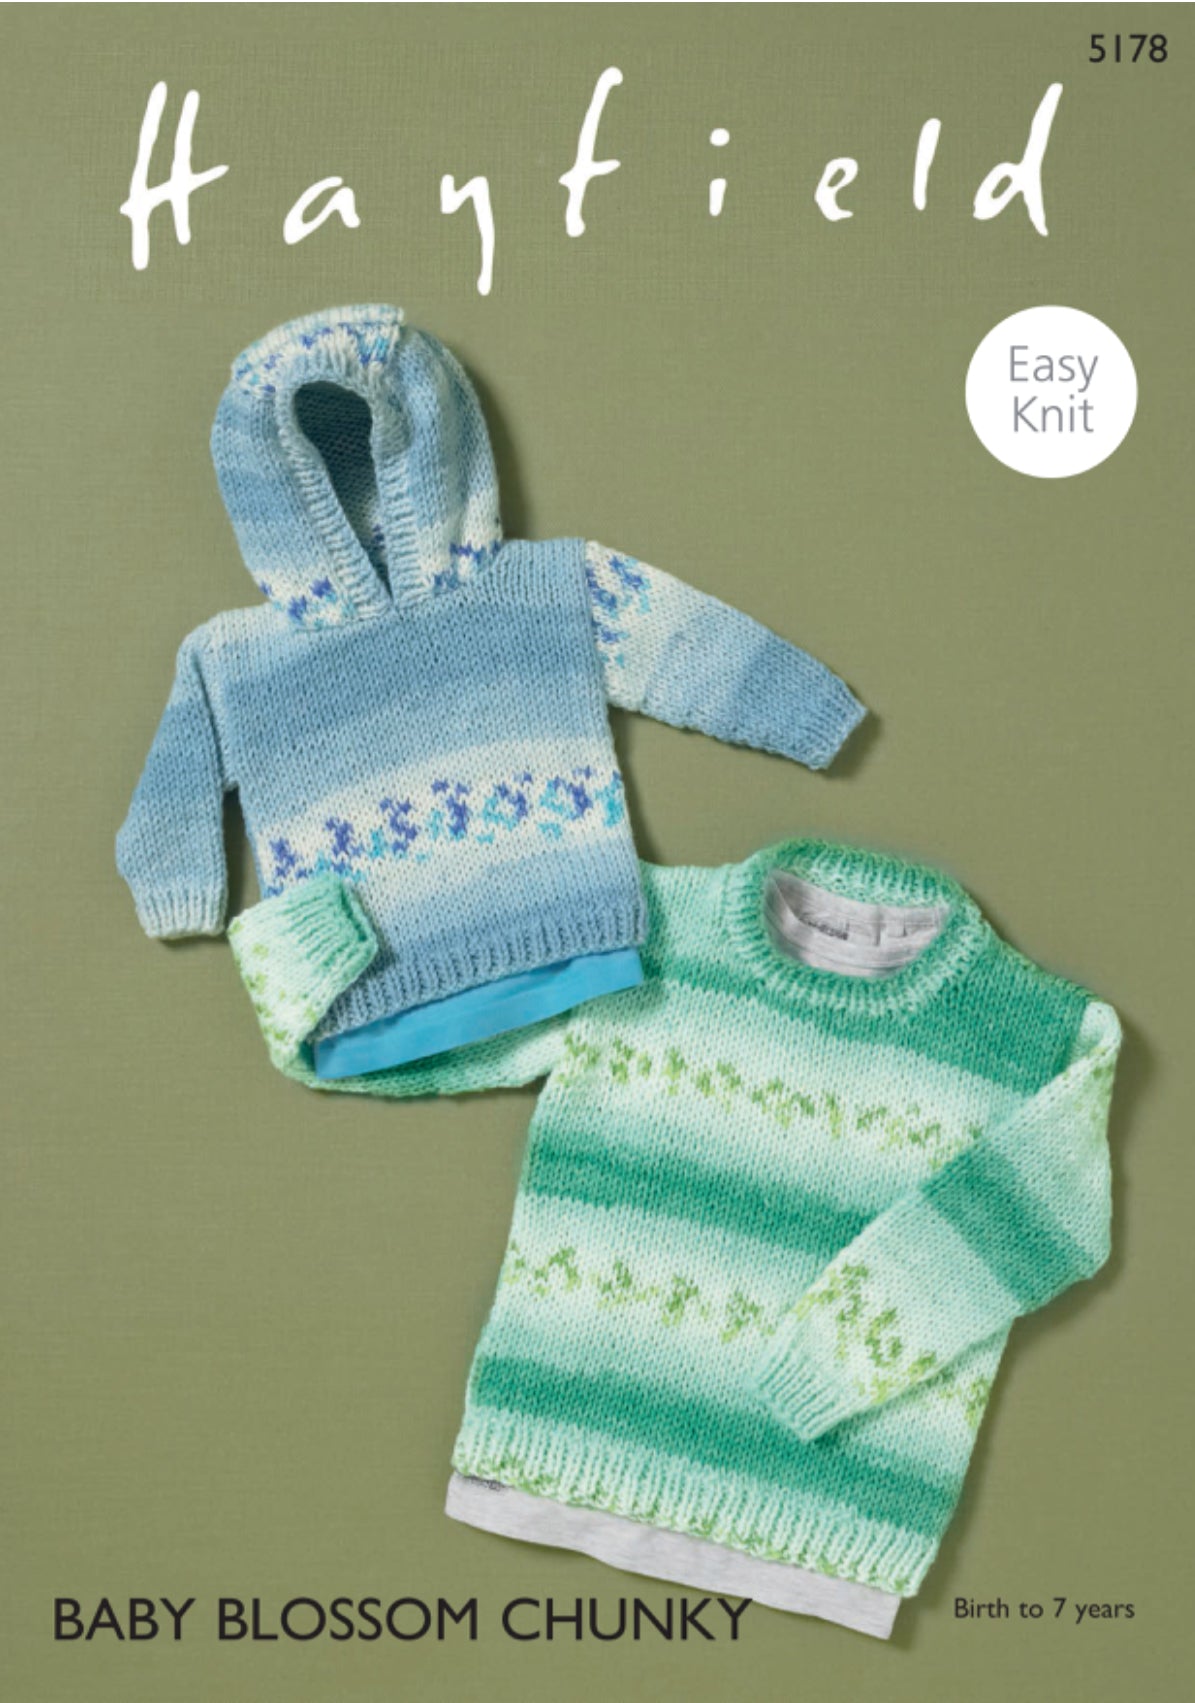 Hayfield 5178 Sweaters in Baby Blossom Chunky